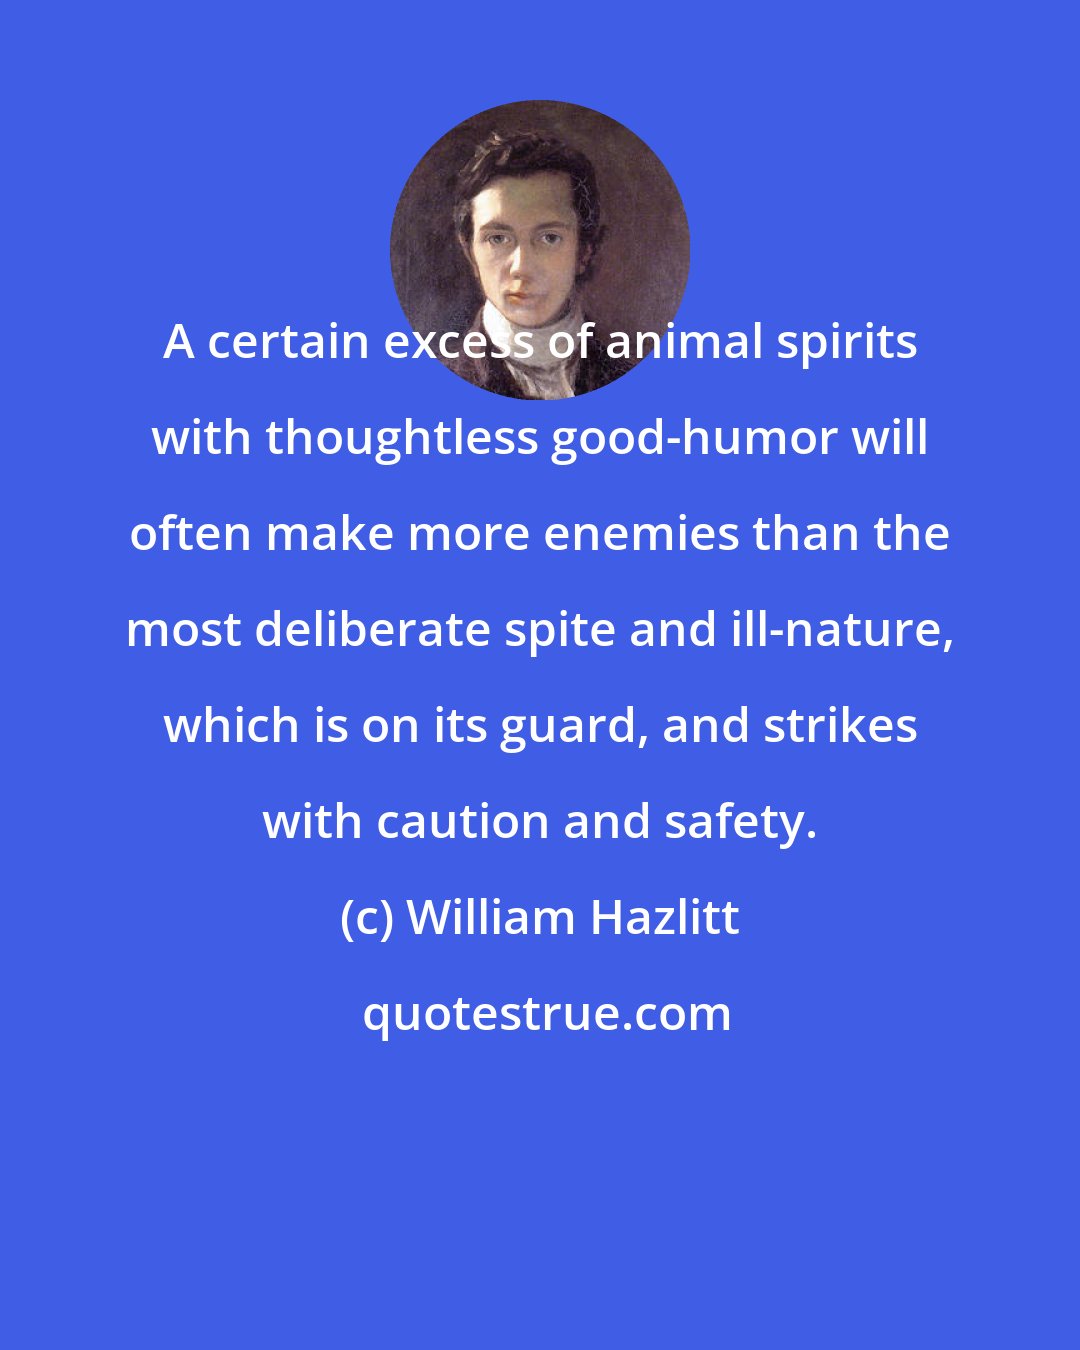 William Hazlitt: A certain excess of animal spirits with thoughtless good-humor will often make more enemies than the most deliberate spite and ill-nature, which is on its guard, and strikes with caution and safety.